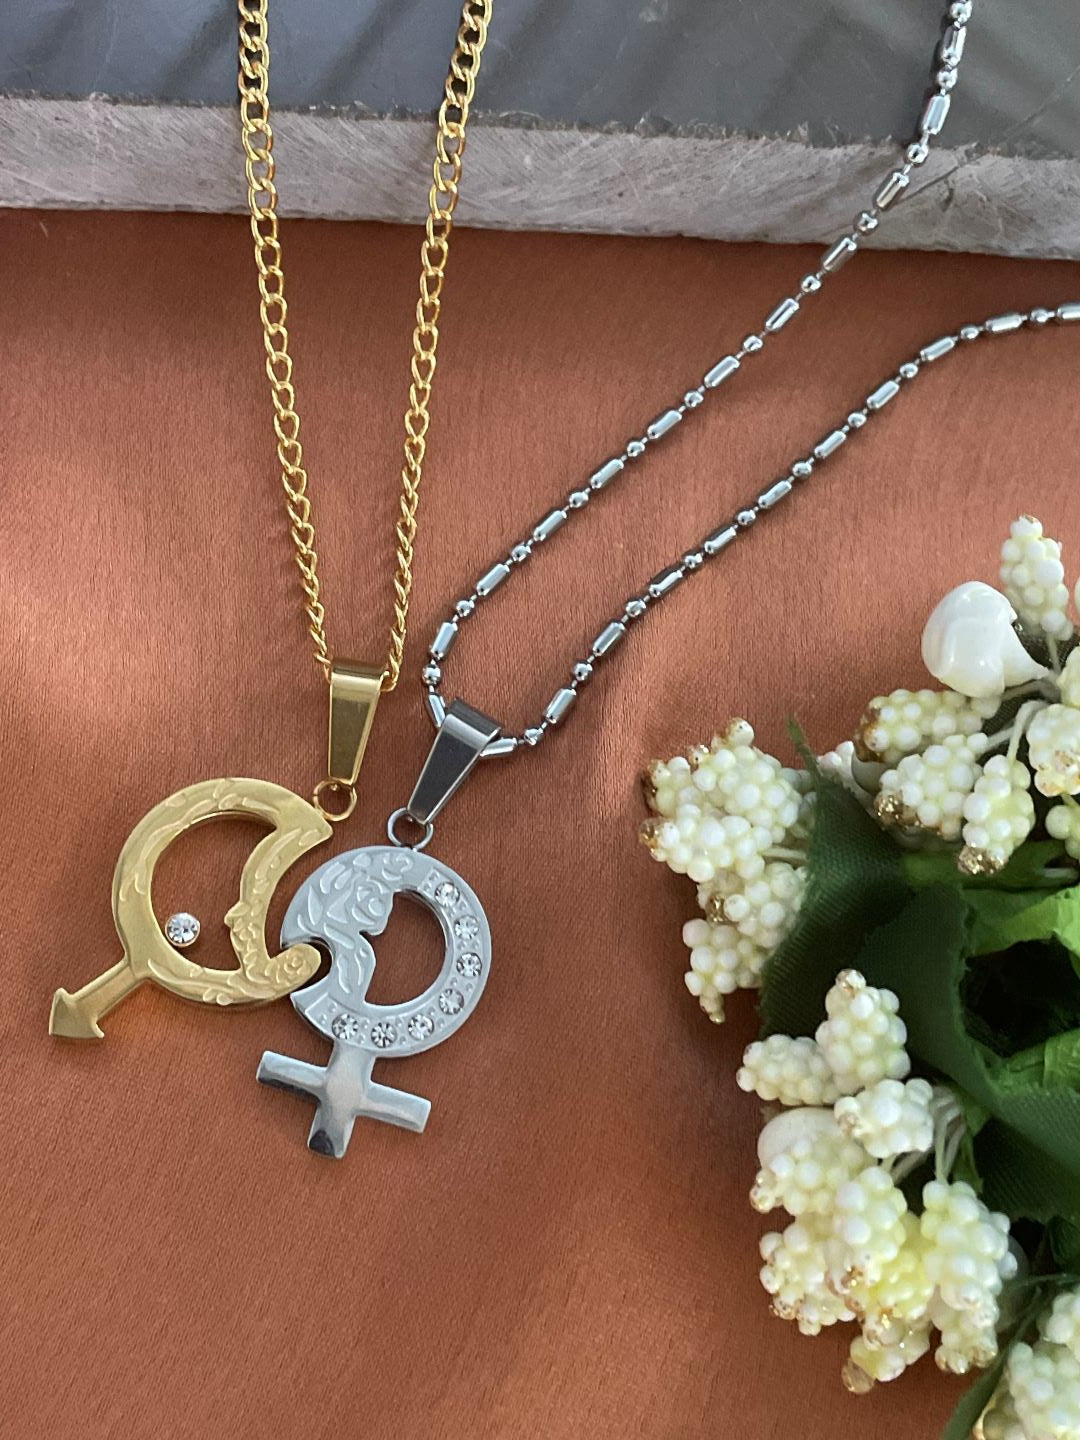 He Who Holds the Key Couple Necklace Set 18k Gold Plated | Couple necklaces,  Matching necklaces for couples, Key to my heart